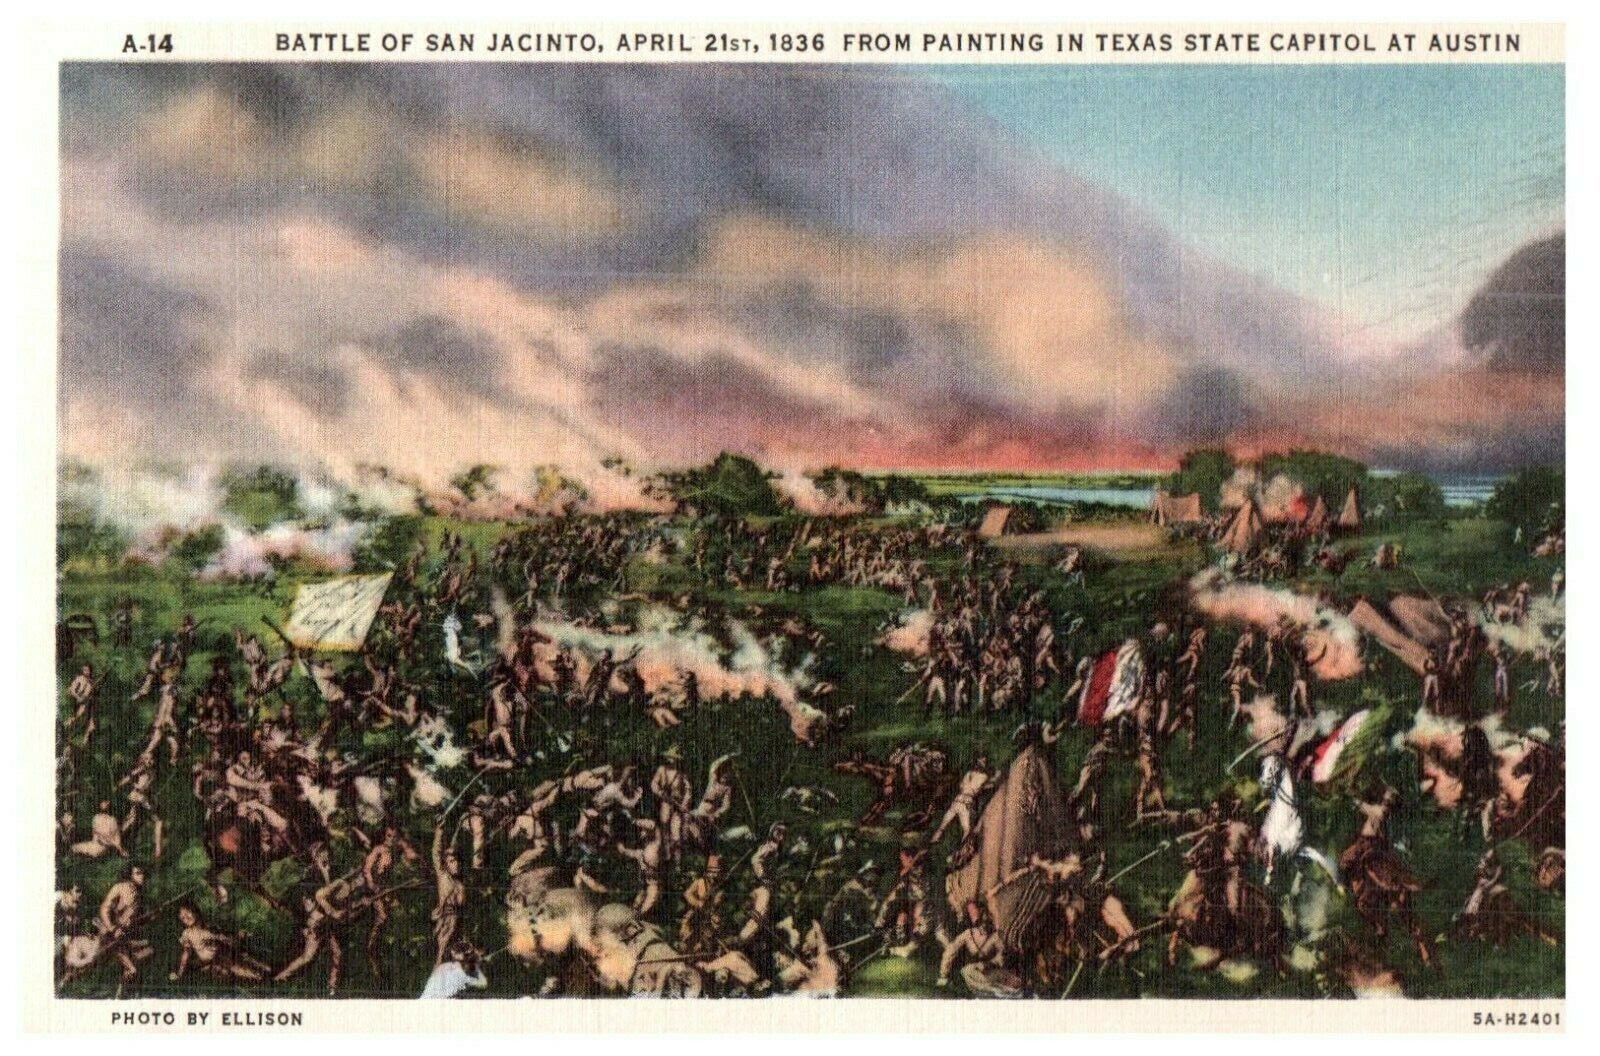 Battle of San Jacinto April 21 1836 From Painting in Texas Capitol Austin